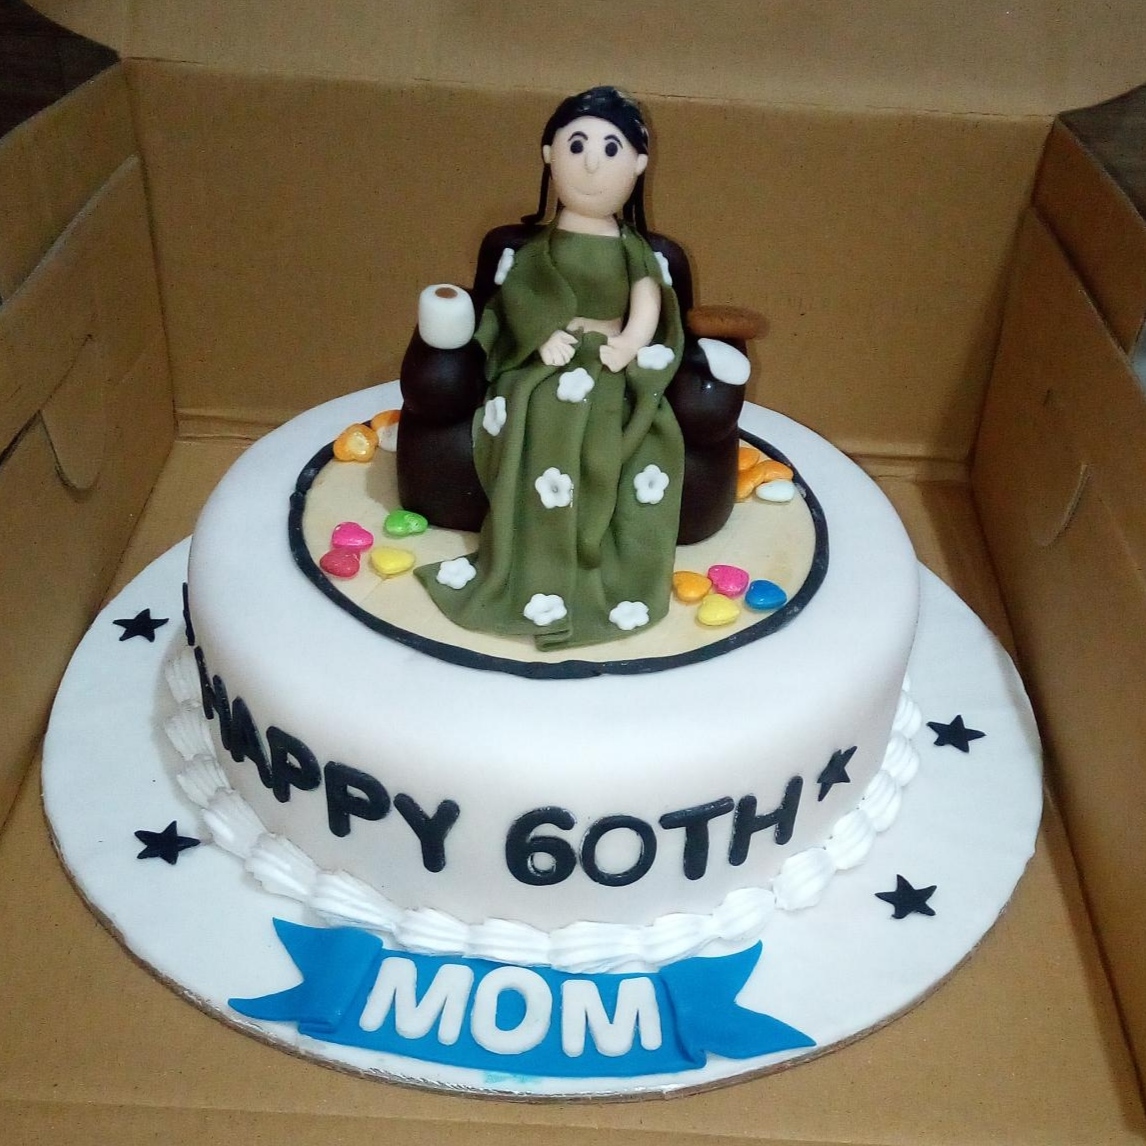 9 Best 60th Birthday Cakes in 3 Categories + the Best Gift Ideas